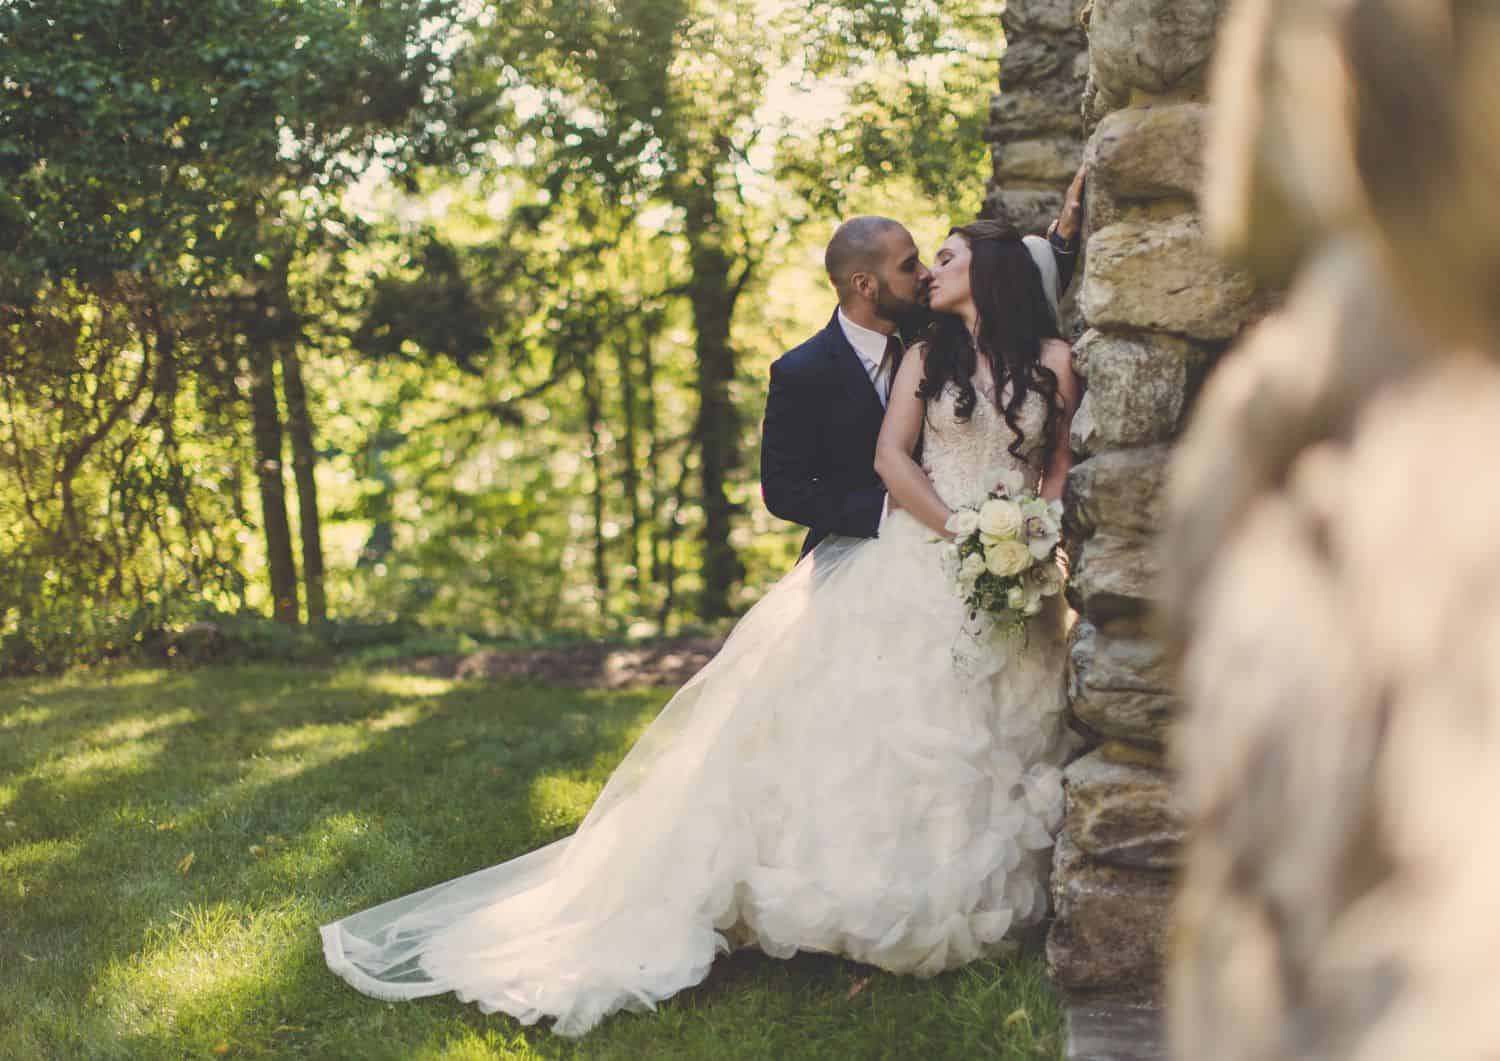 Groom kisses bride in ballgown against stone wall. By Harris & Co.